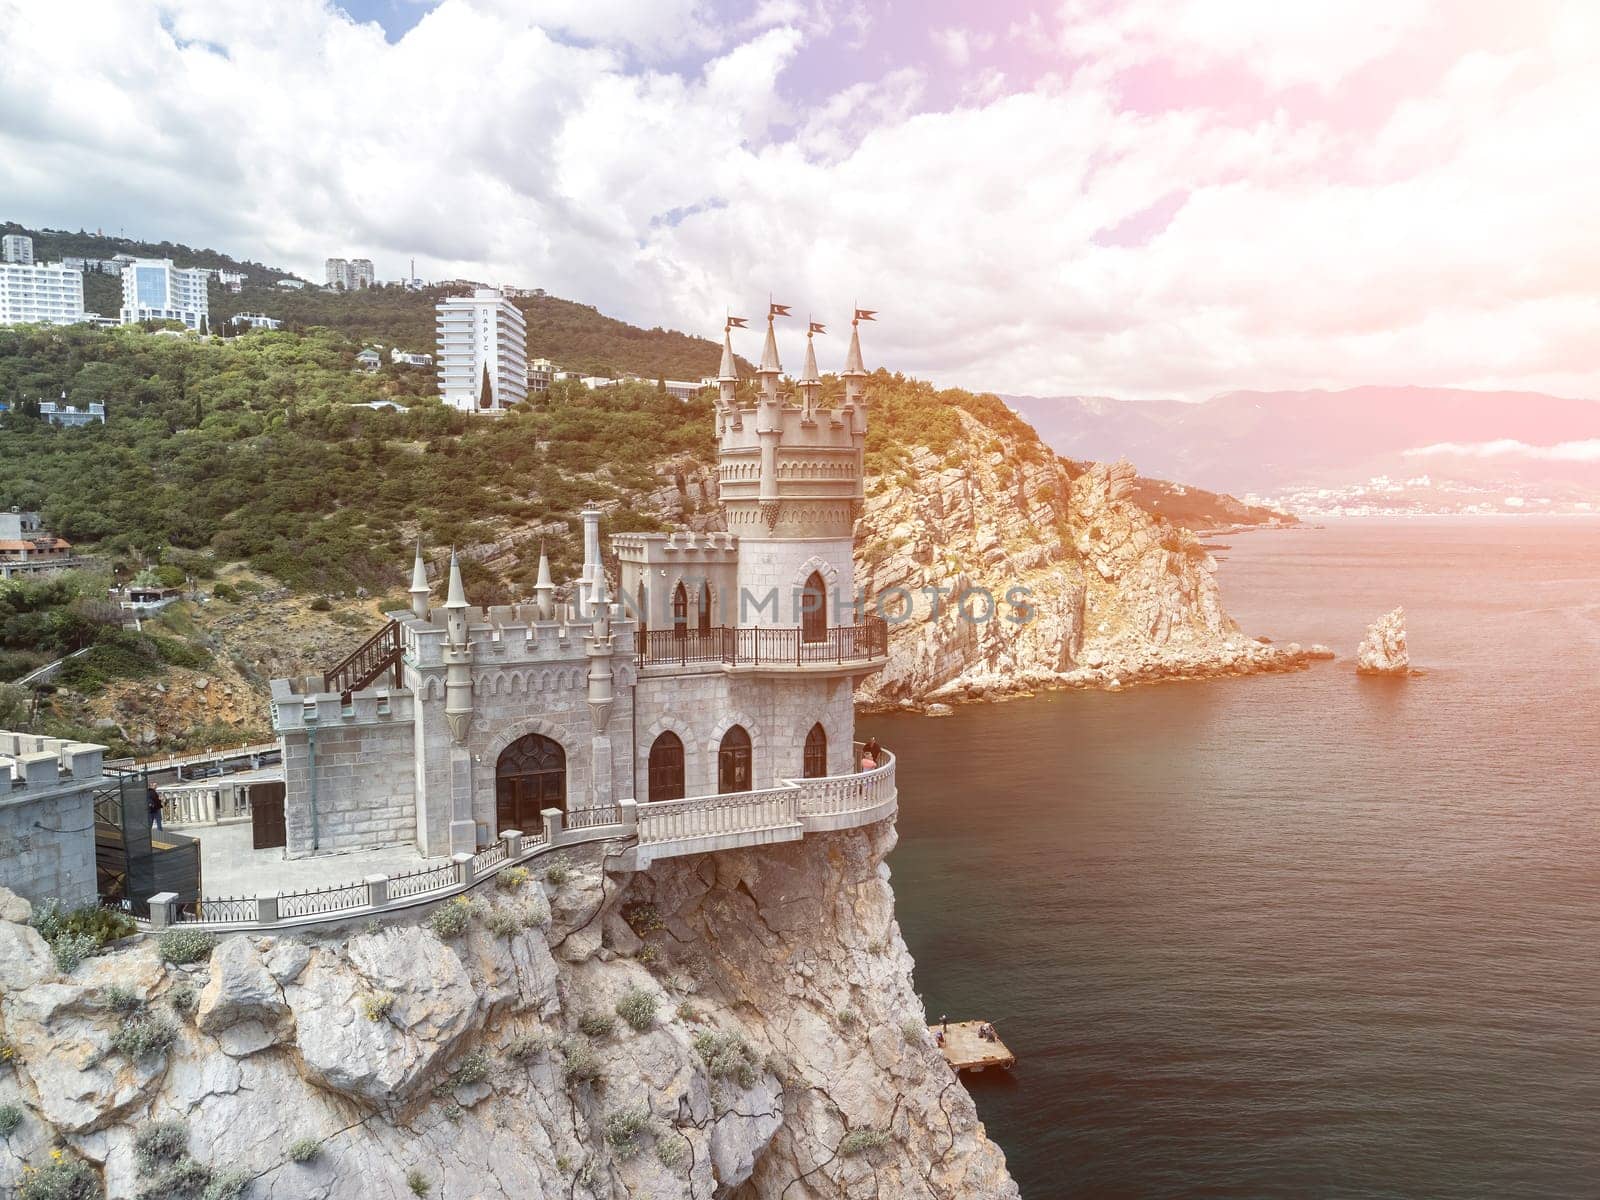 Crimea Swallow's Nest Castle on the rock over the Black Sea. It is a tourist attraction of Crimea. Amazing aerial view of the Crimea coast with the castle above abyss on sunny day. by panophotograph